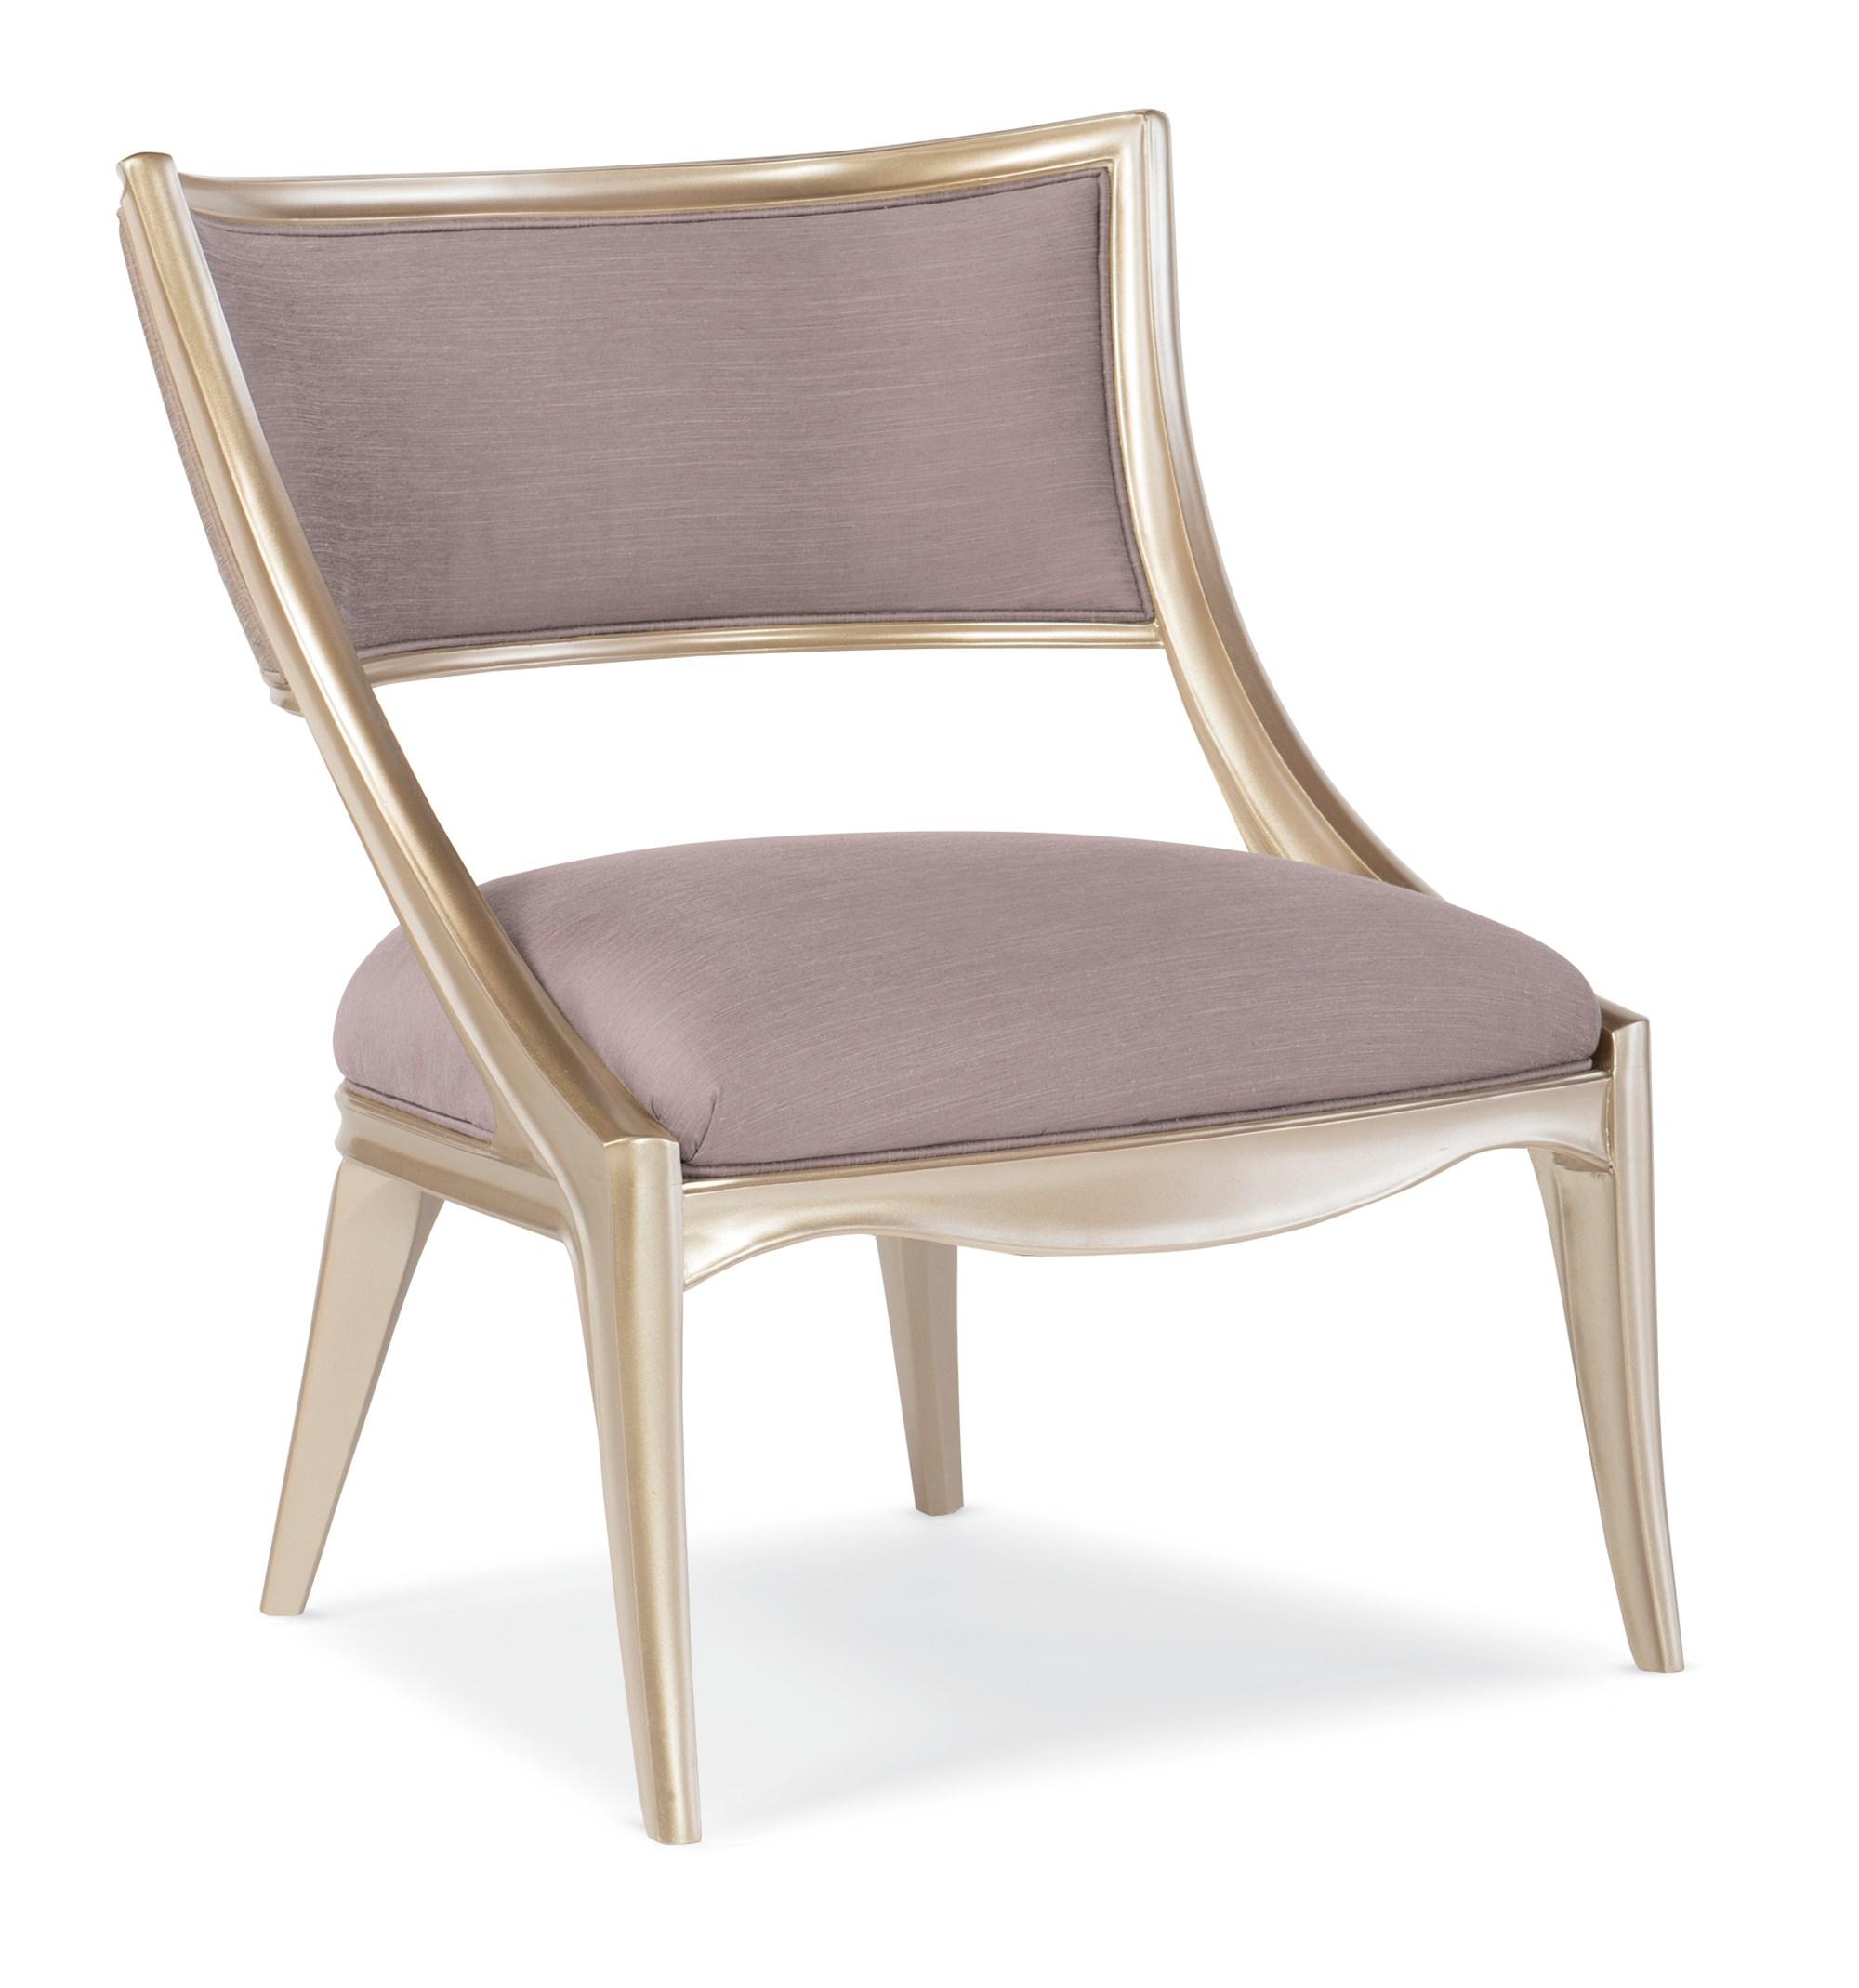 Traditional Accent Chair ADELA CHAIR C010-016-131-A in Taupe, Lavender Fabric